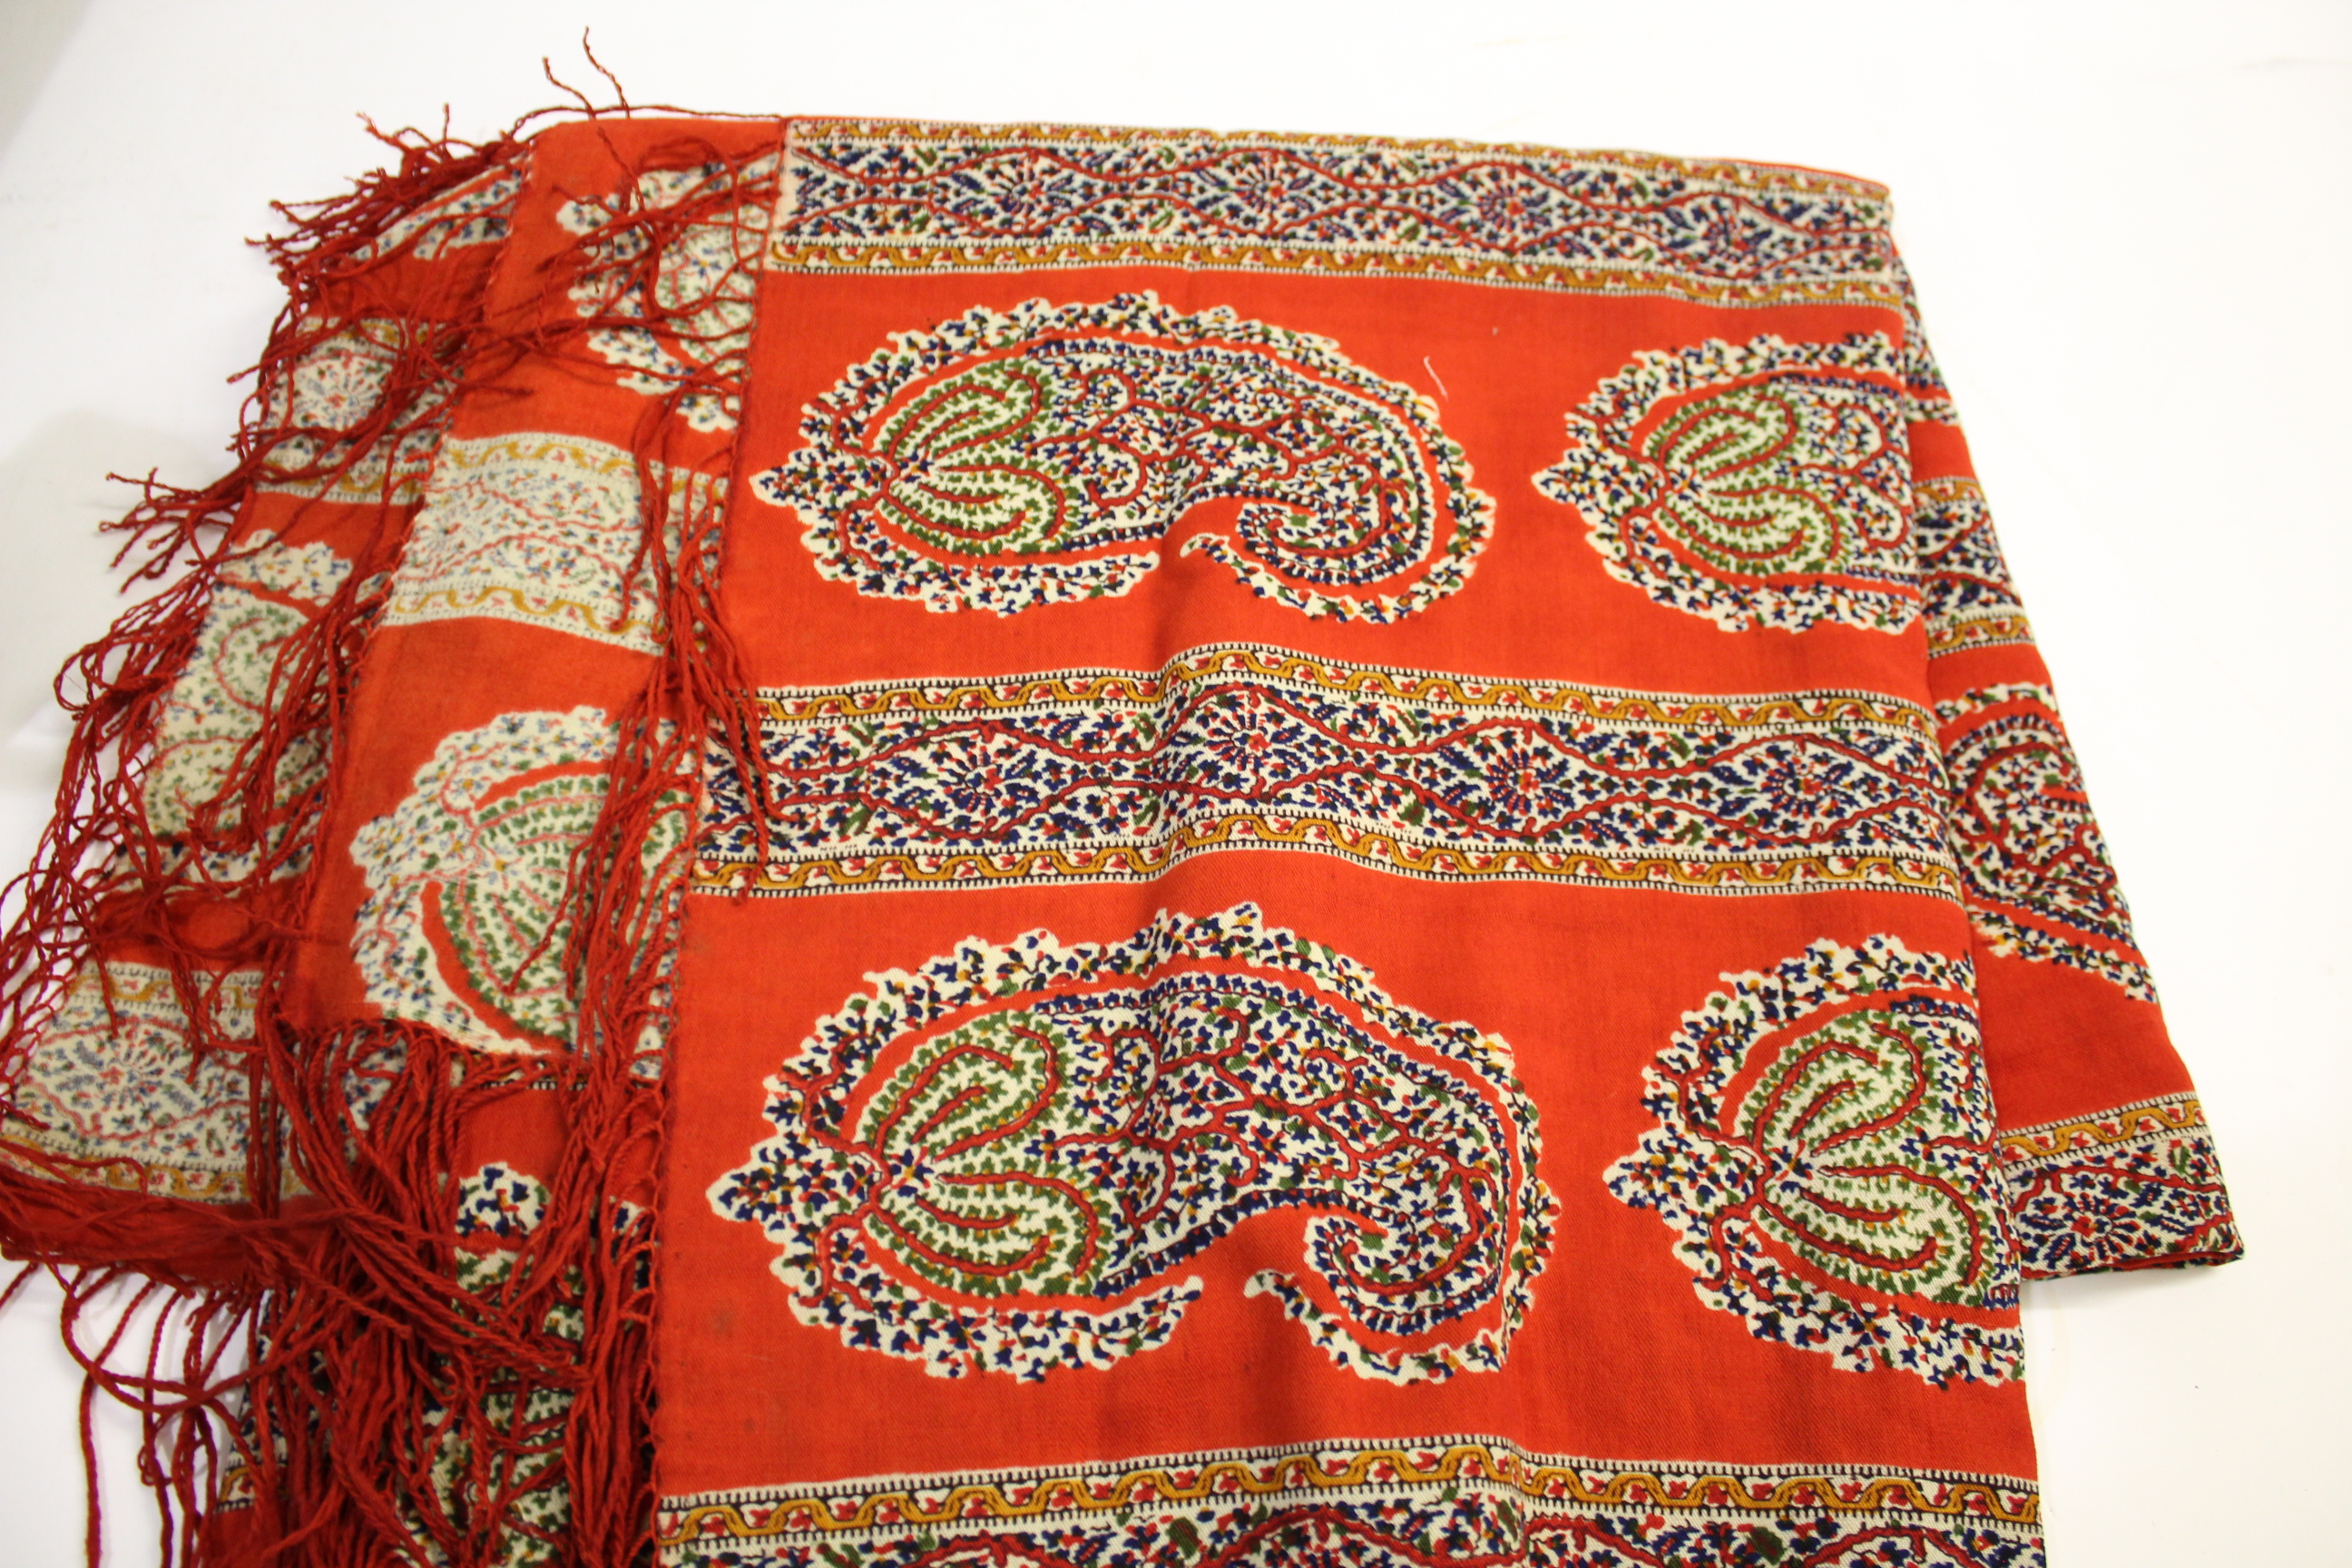 19THC PAISLEY SHAWL a fringed wool shawl, also with an Eastern European embroidered apron, an Indian